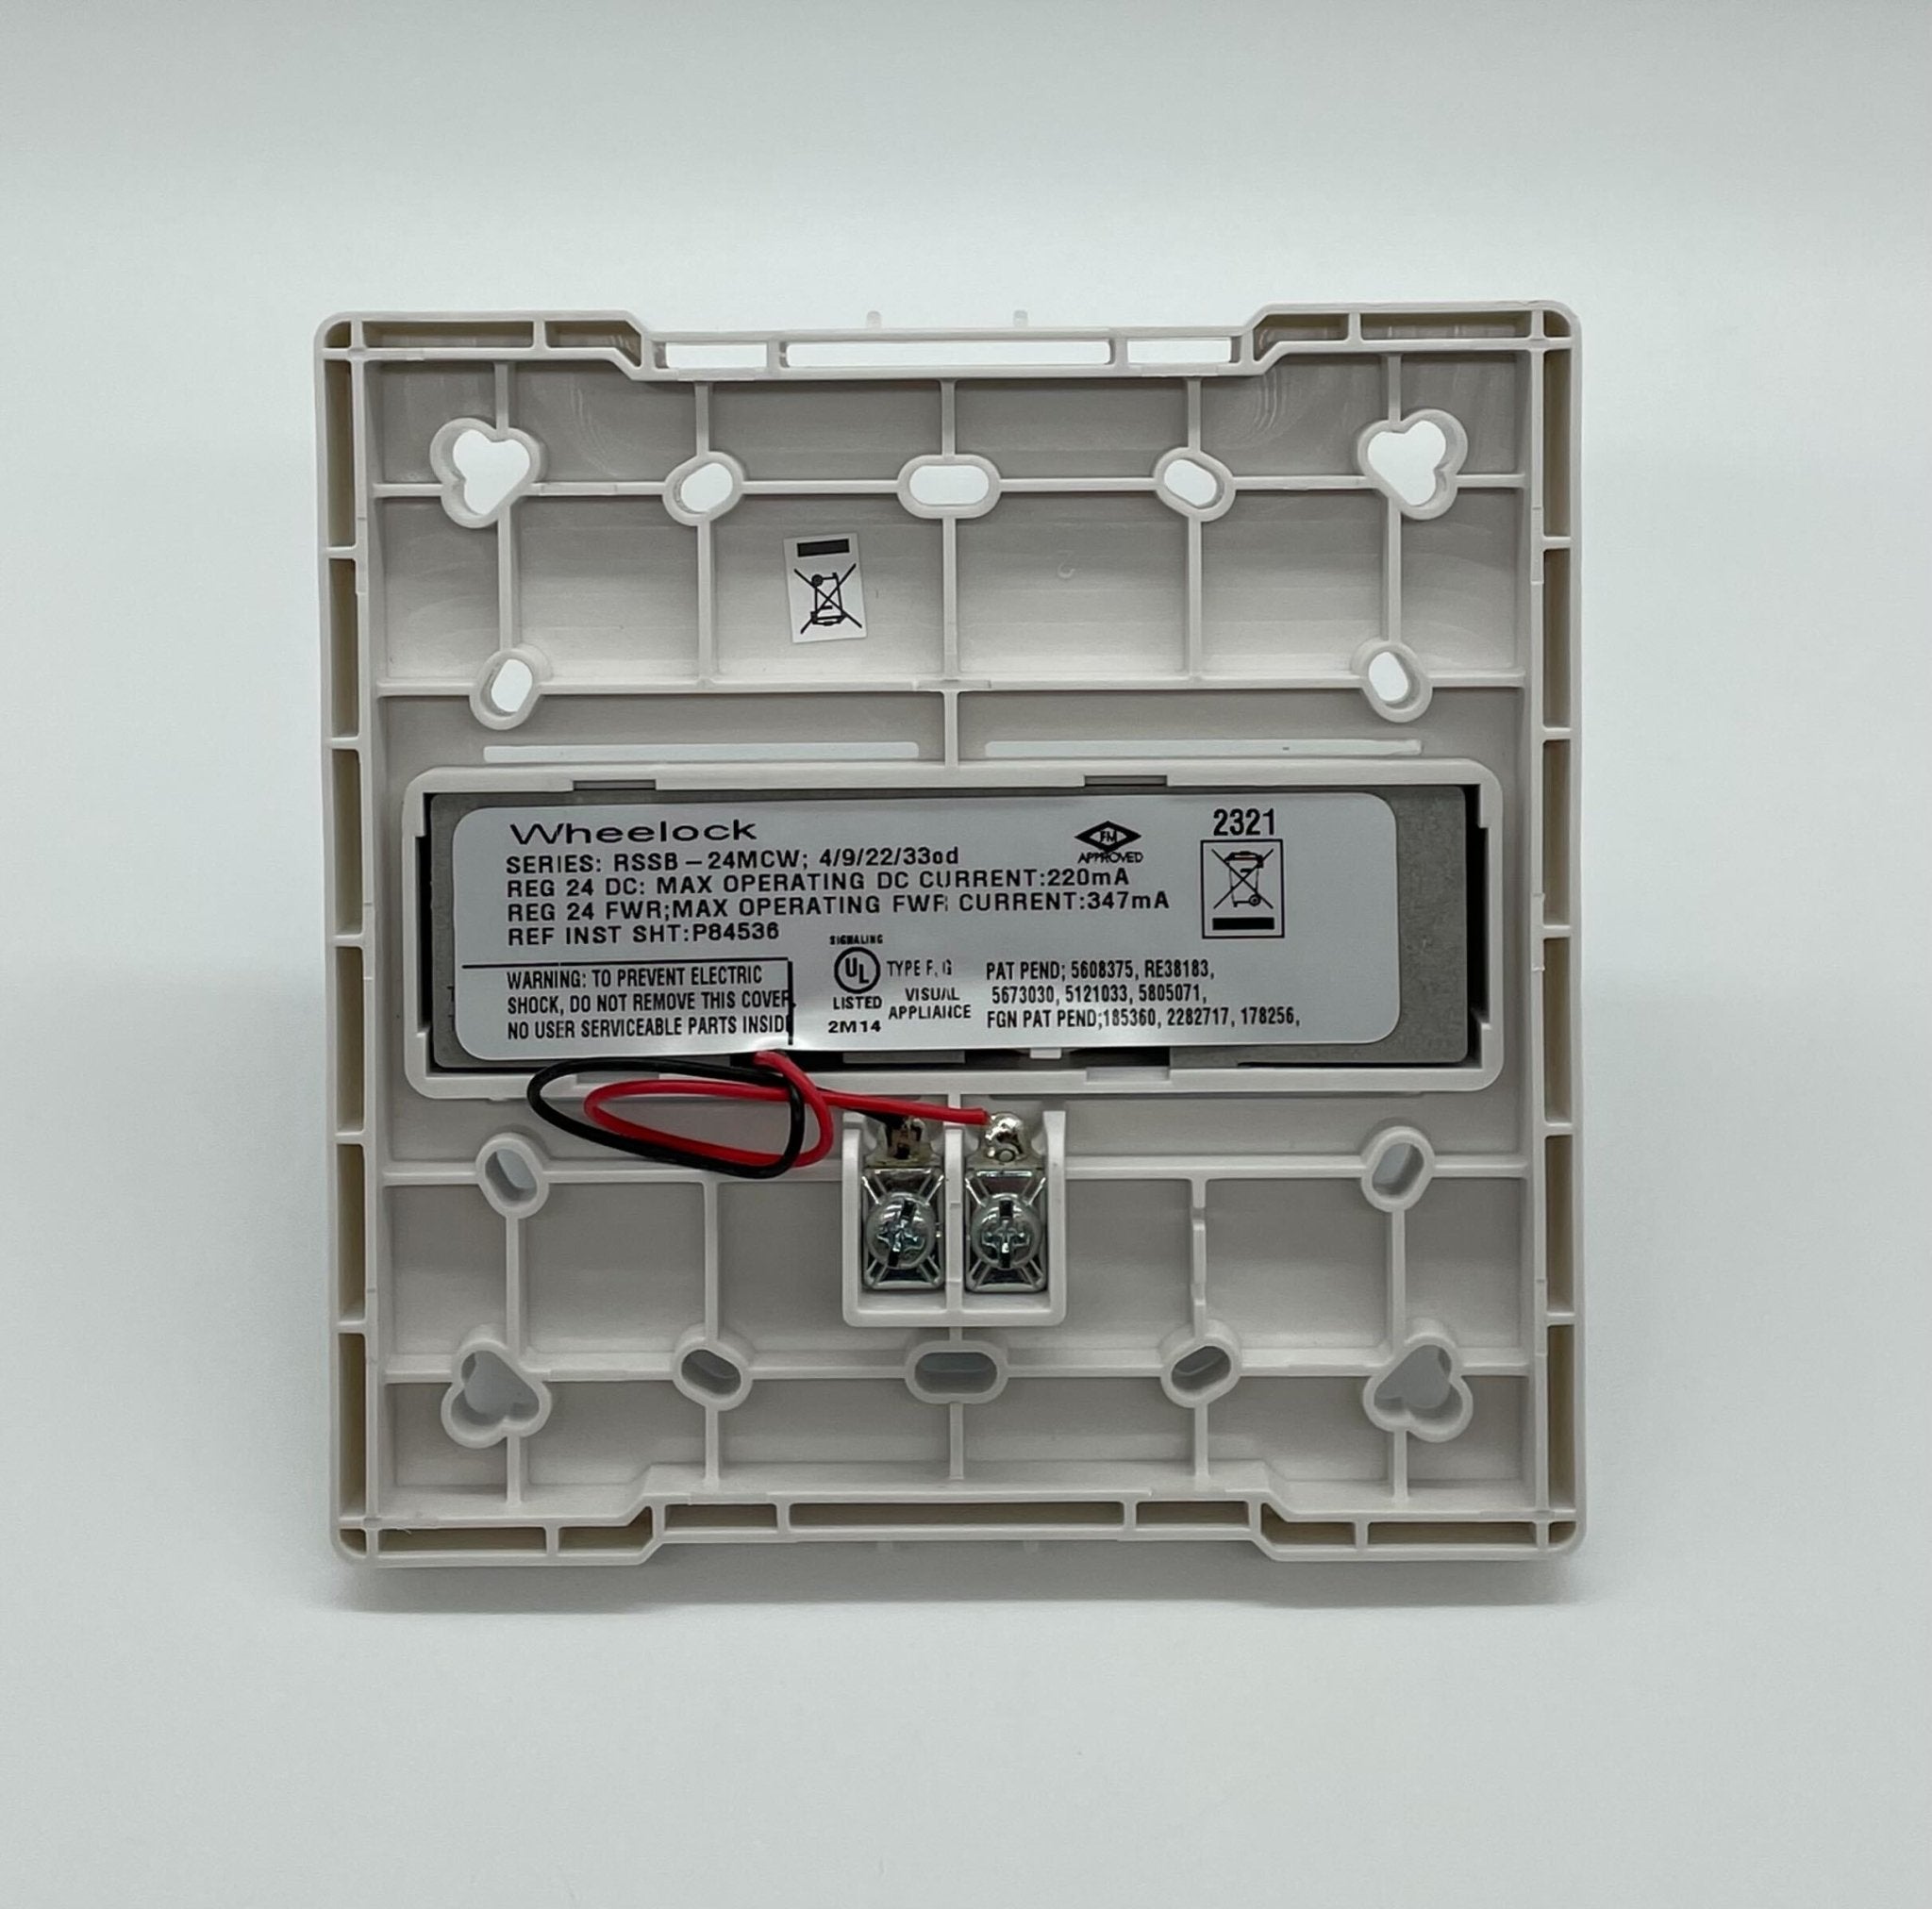 Wheelock RSSB-24MCW-NW - The Fire Alarm Supplier